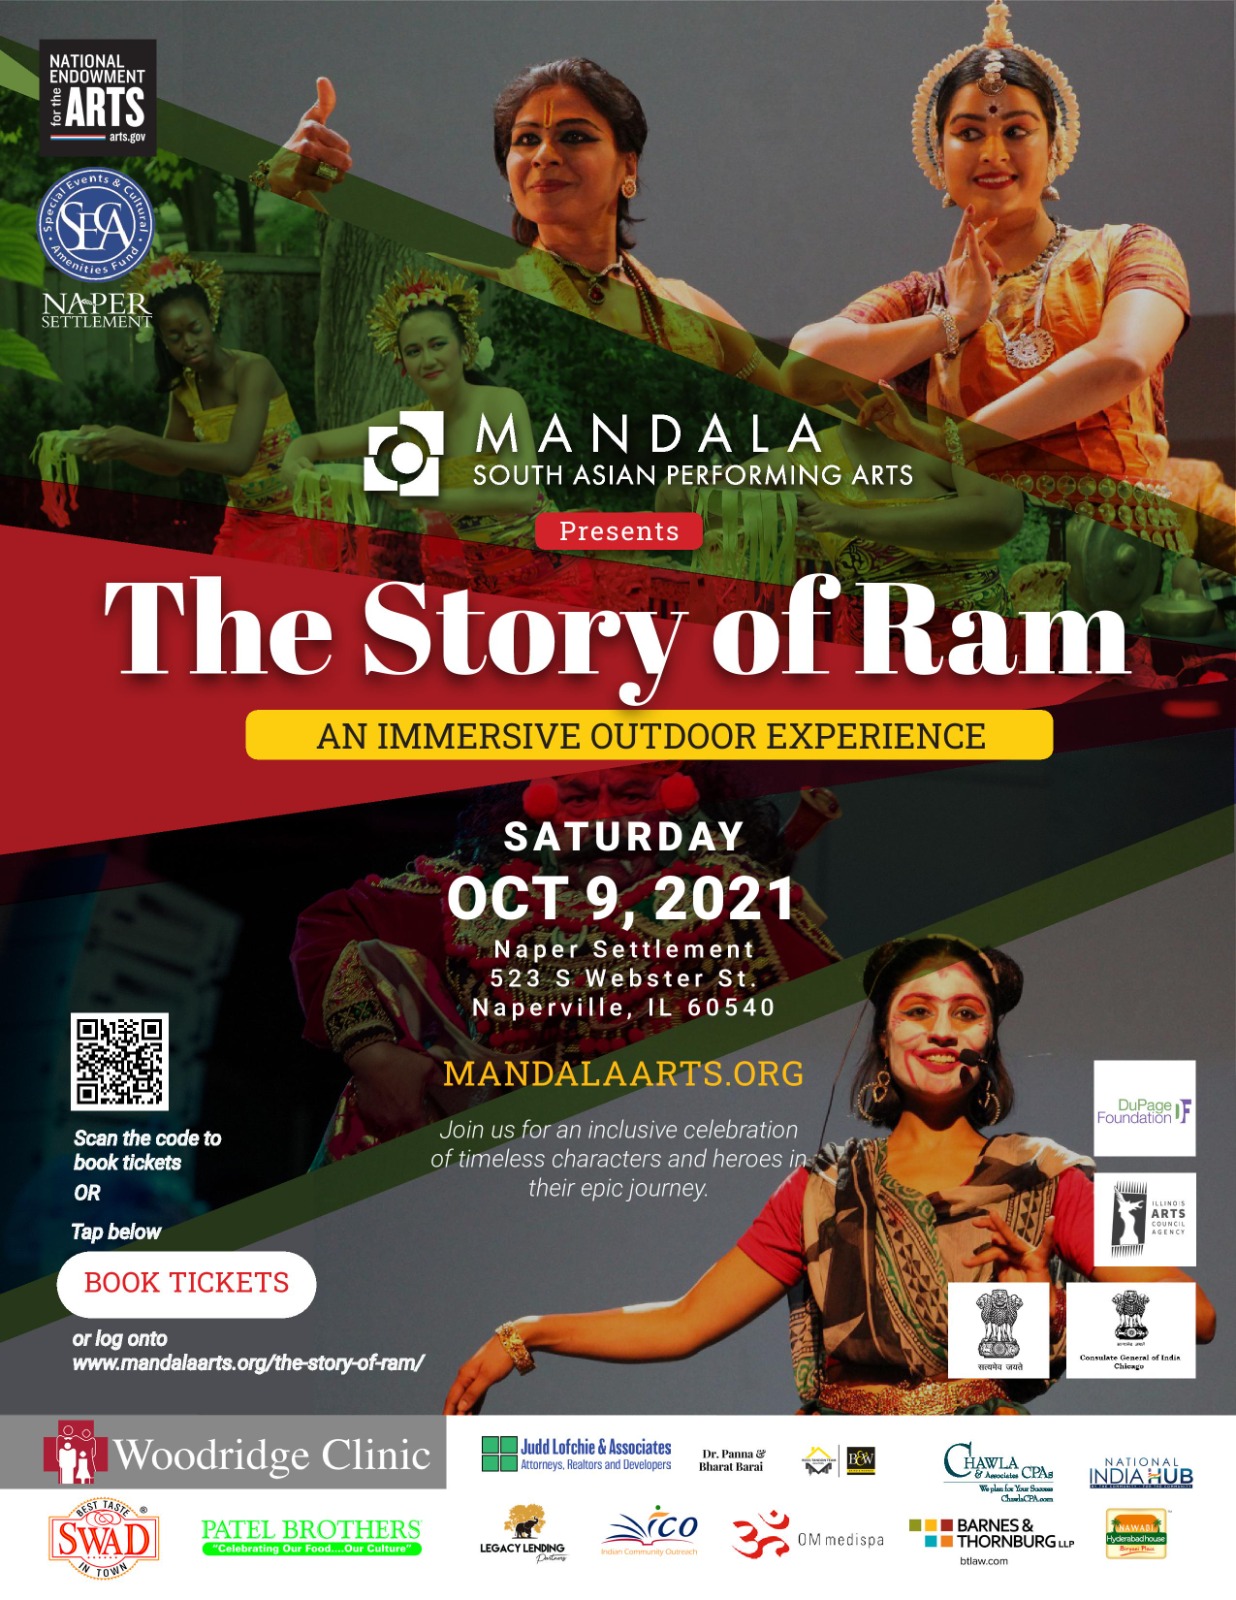 The Story of Ram - 11:00am Show